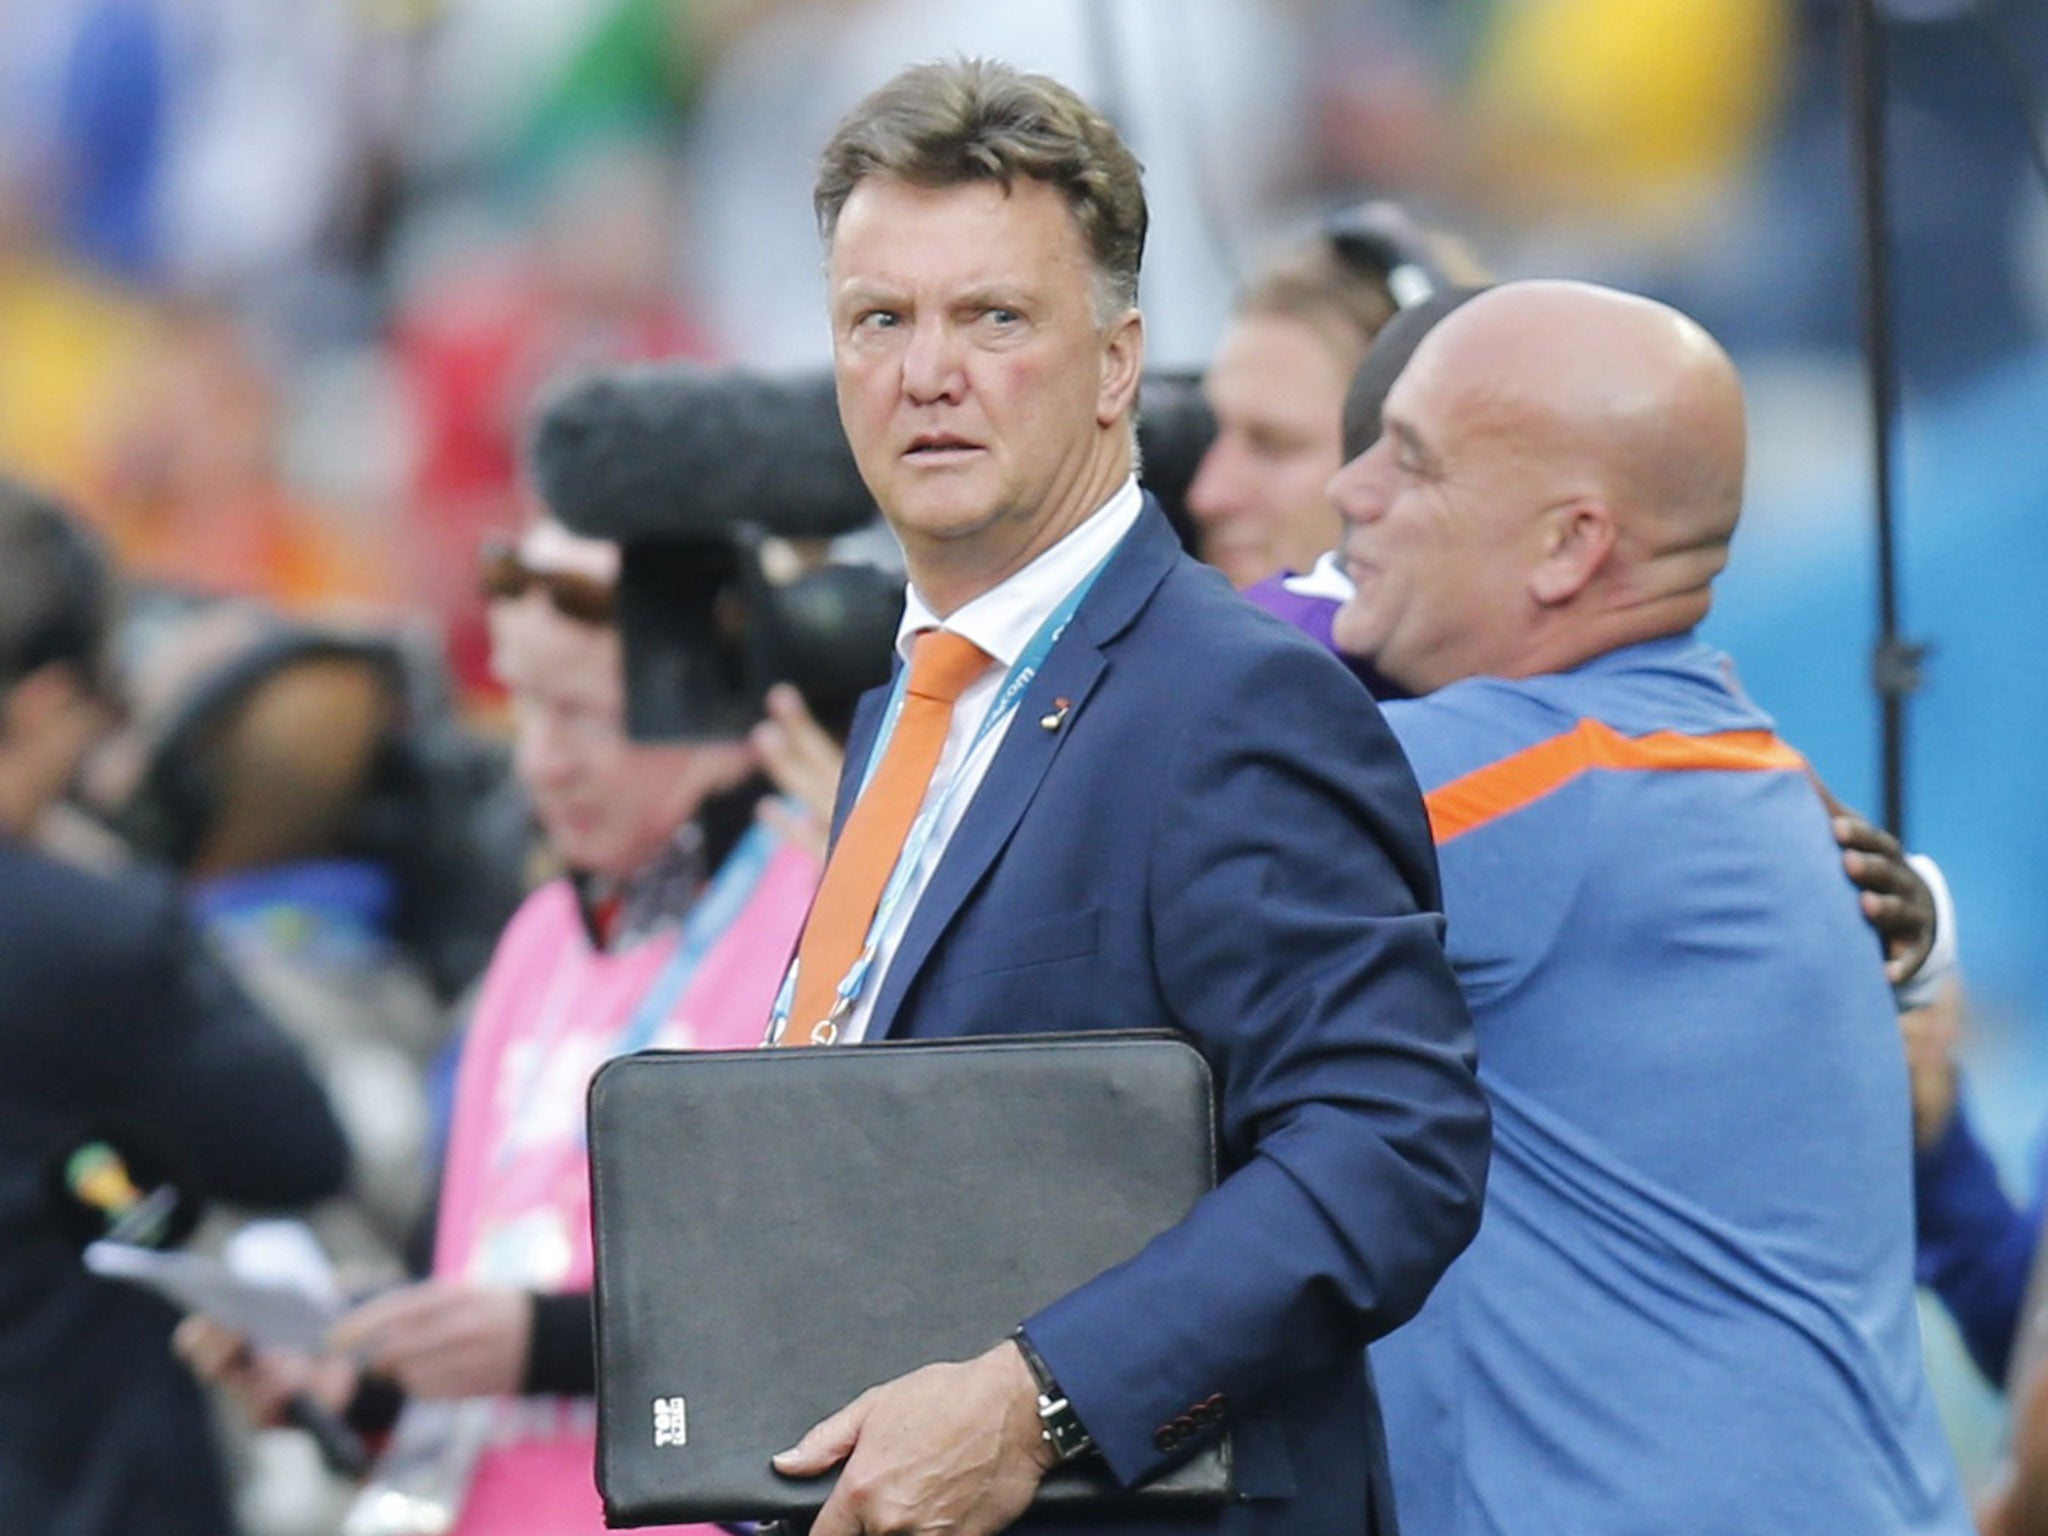 Louis van Gaal will join up with the Manchester United squad soon after the Netherlands were eliminated from the World Cup